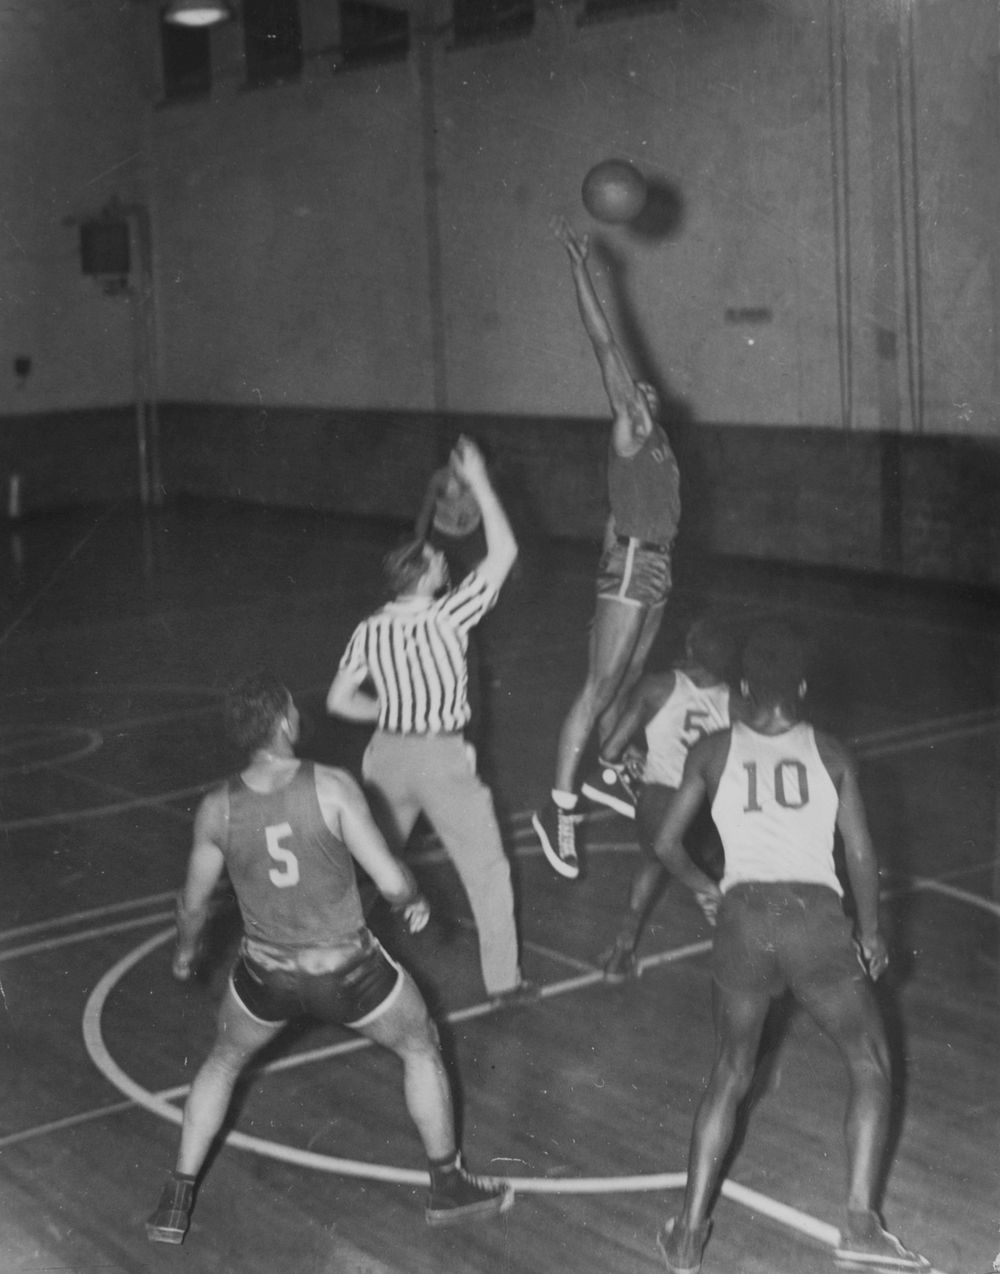 Basketball competition. Original public domain image from Flickr